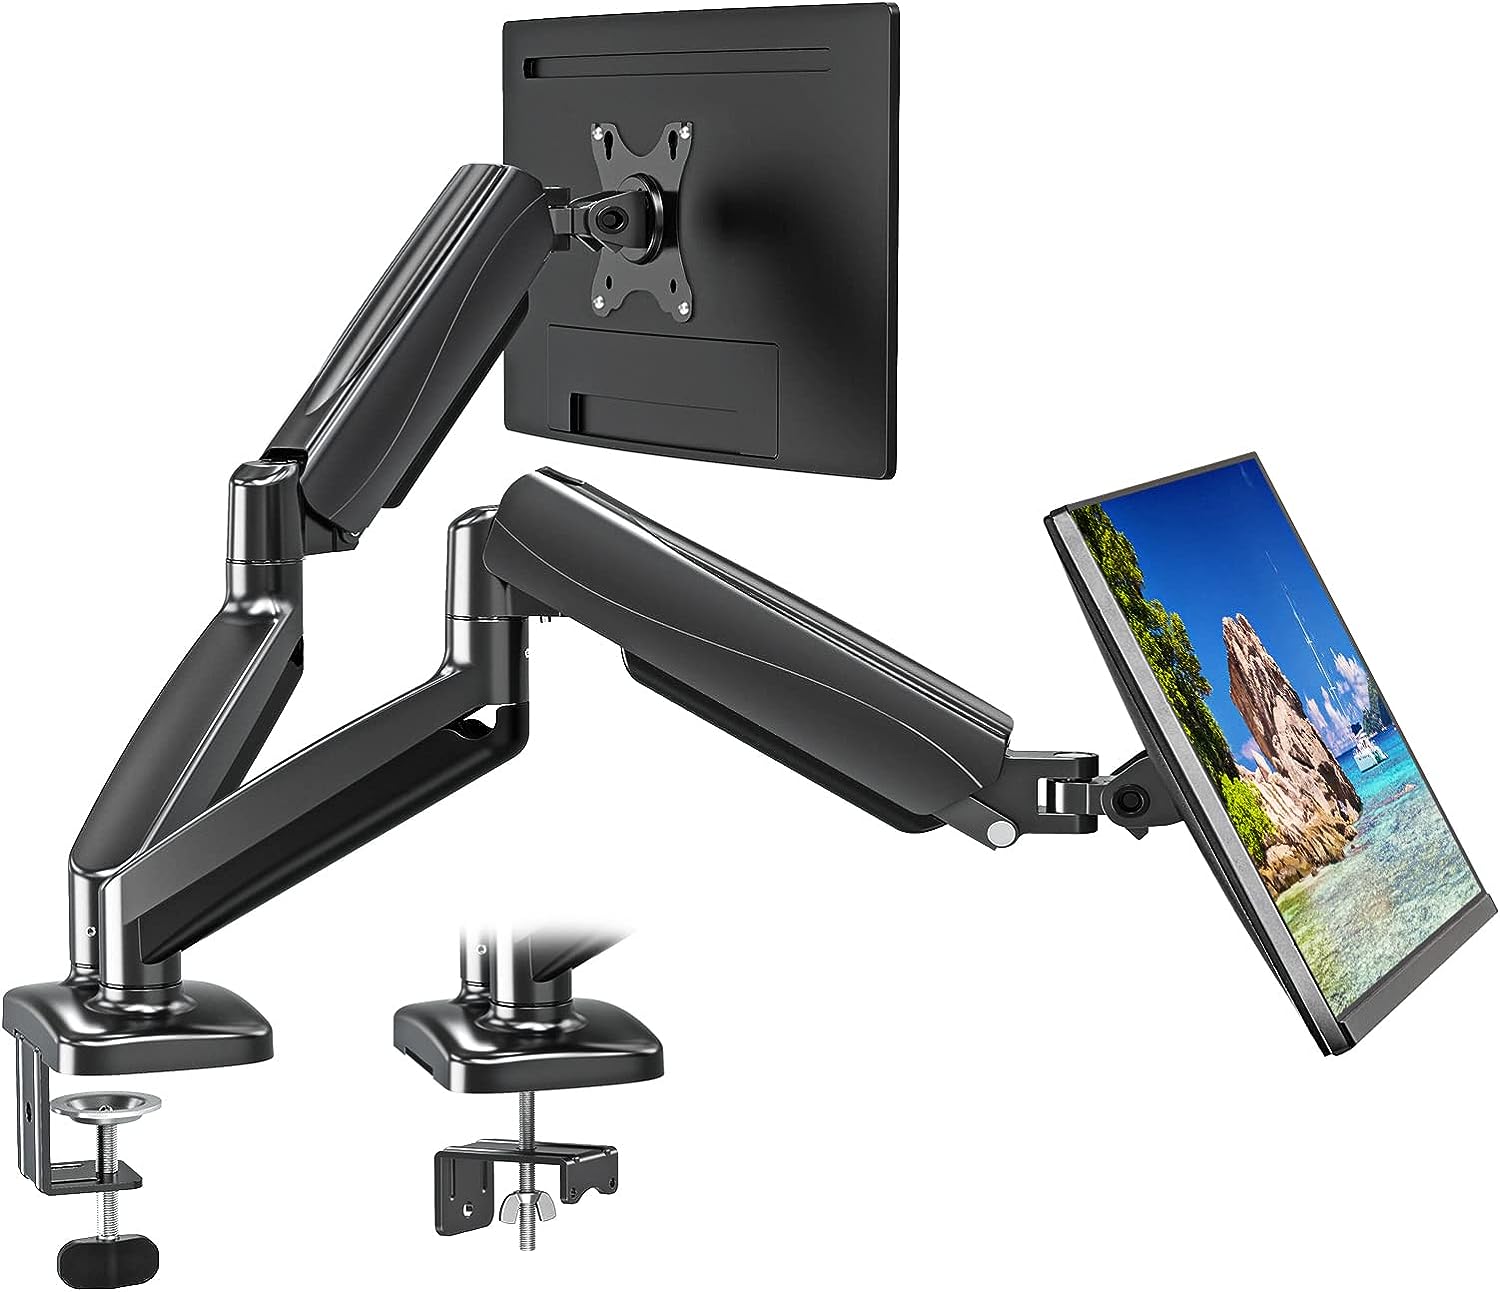 MOUNTUP Dual Monitor Mount for 17 to 32 inch Monitor, [...]